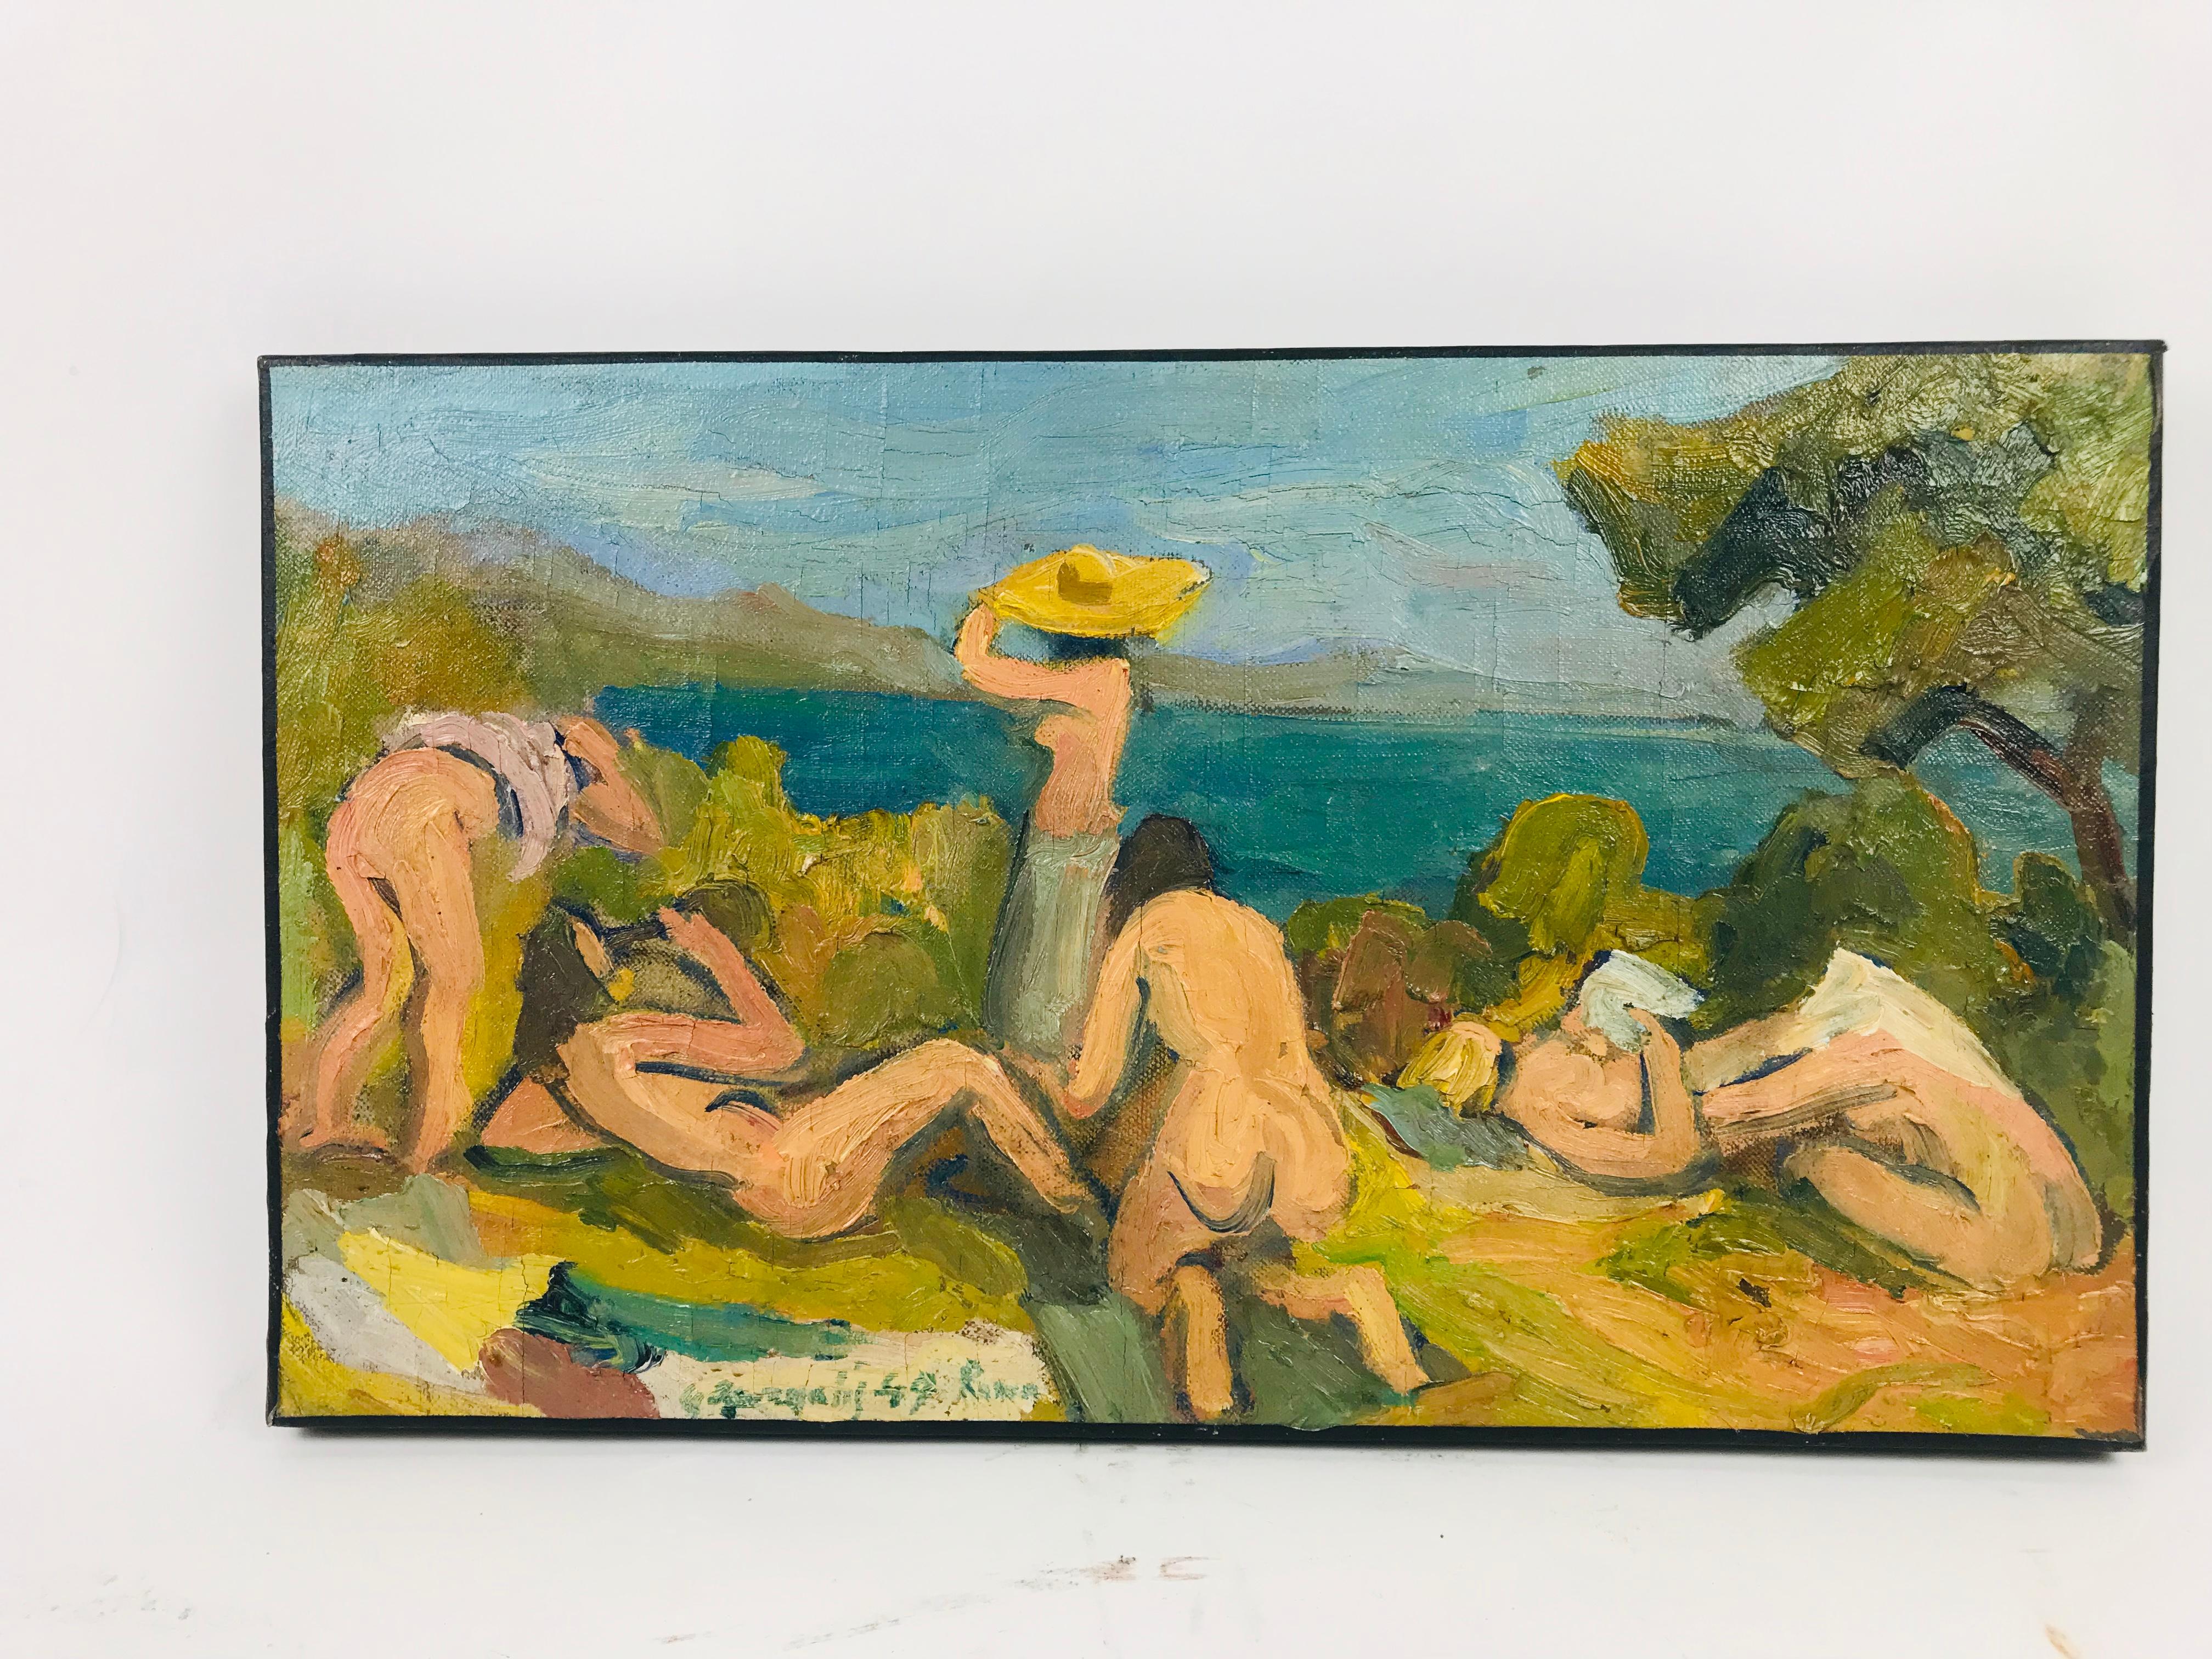 A beautiful 1949 oil on canvas by Massachusetts native George Dergalis(1928). Signed Rome. This is an early painting for the artist with strong confident brush strokes. An impressionistic depiction of a nude beach gathering were the bodies are as